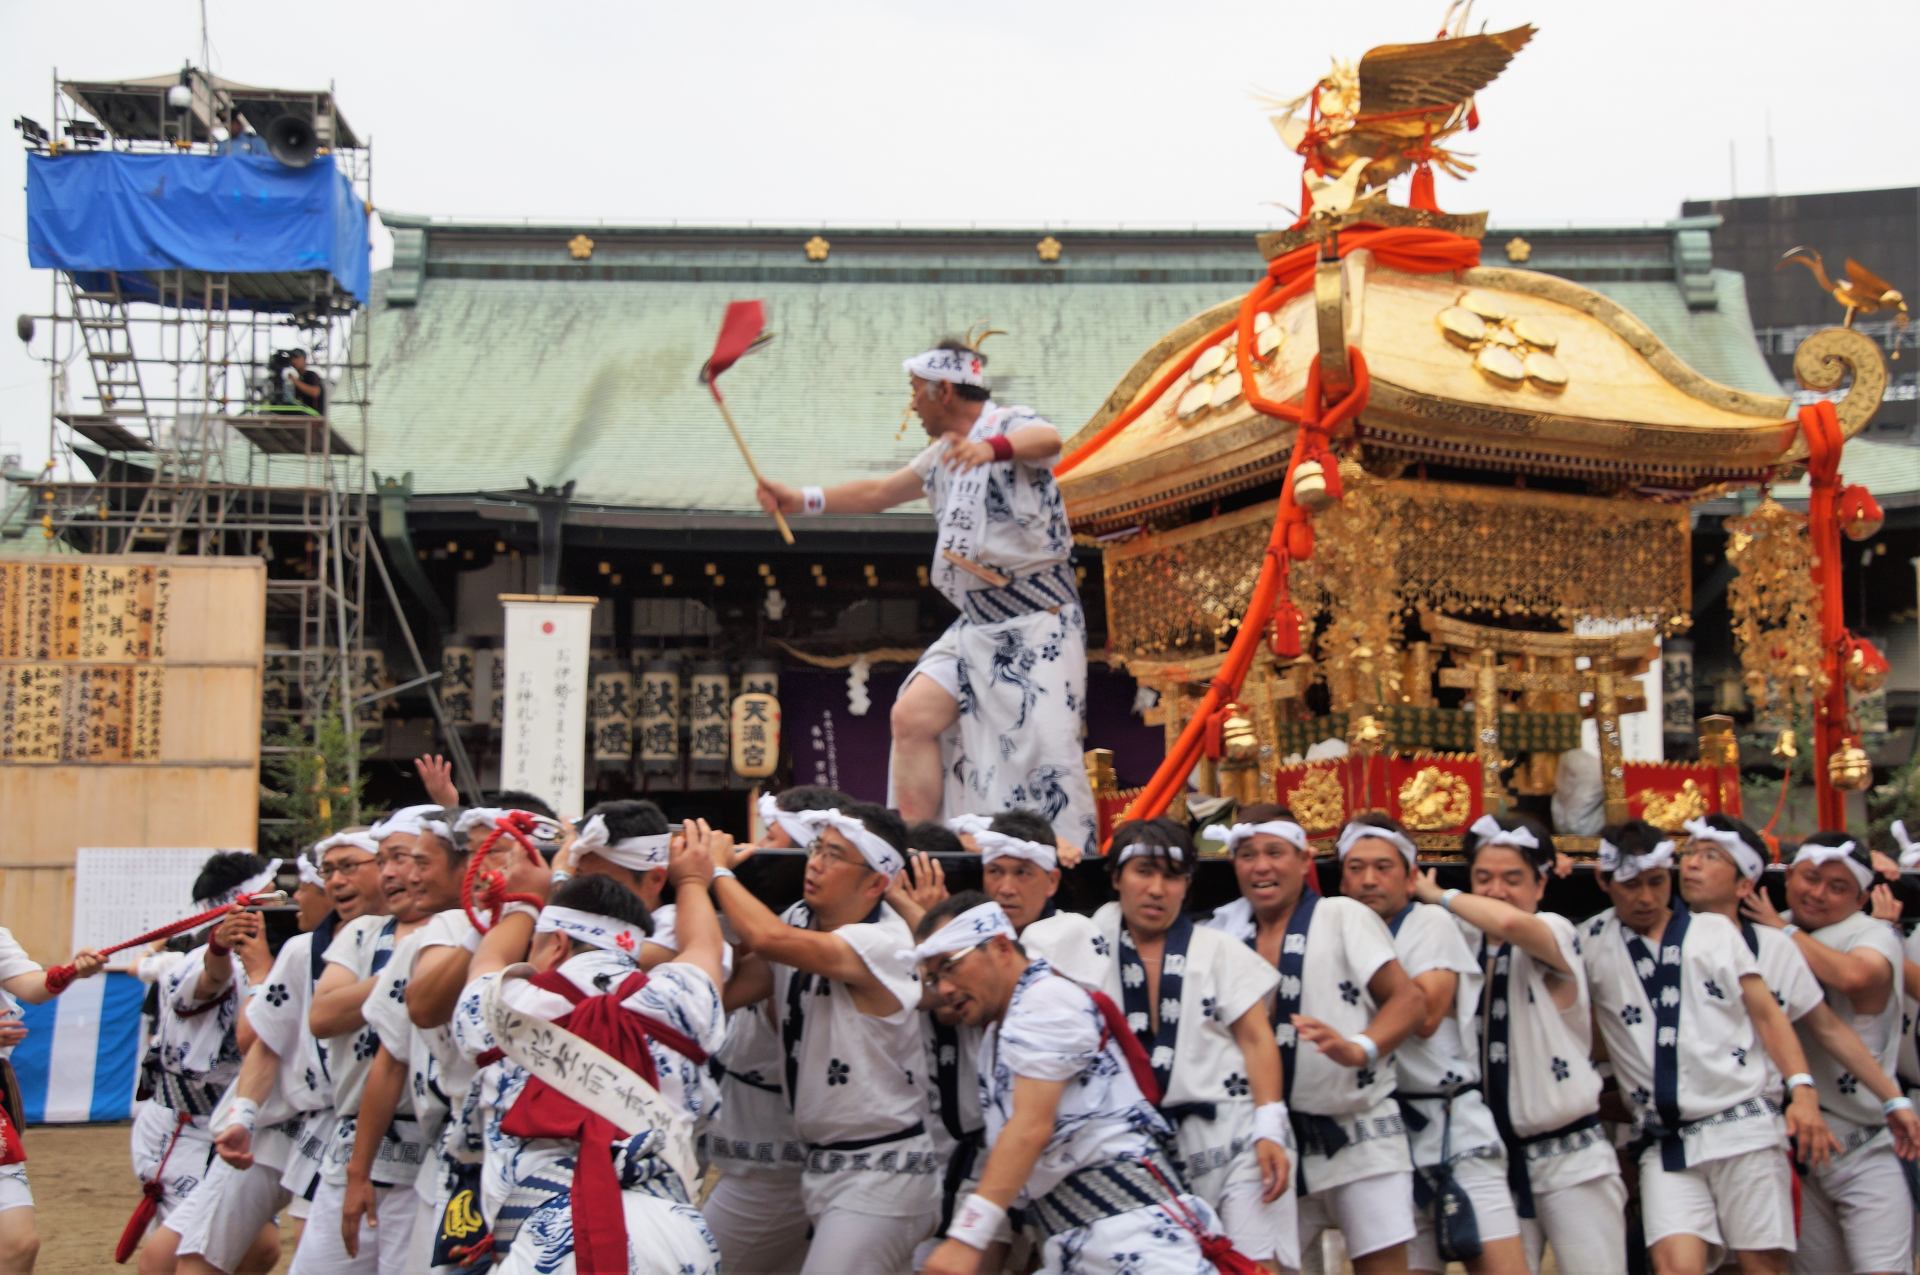 The ritual held at Osaka Tenmangu with more than 1000-year history, regarded as one of Japan’s Three Major Festivals.